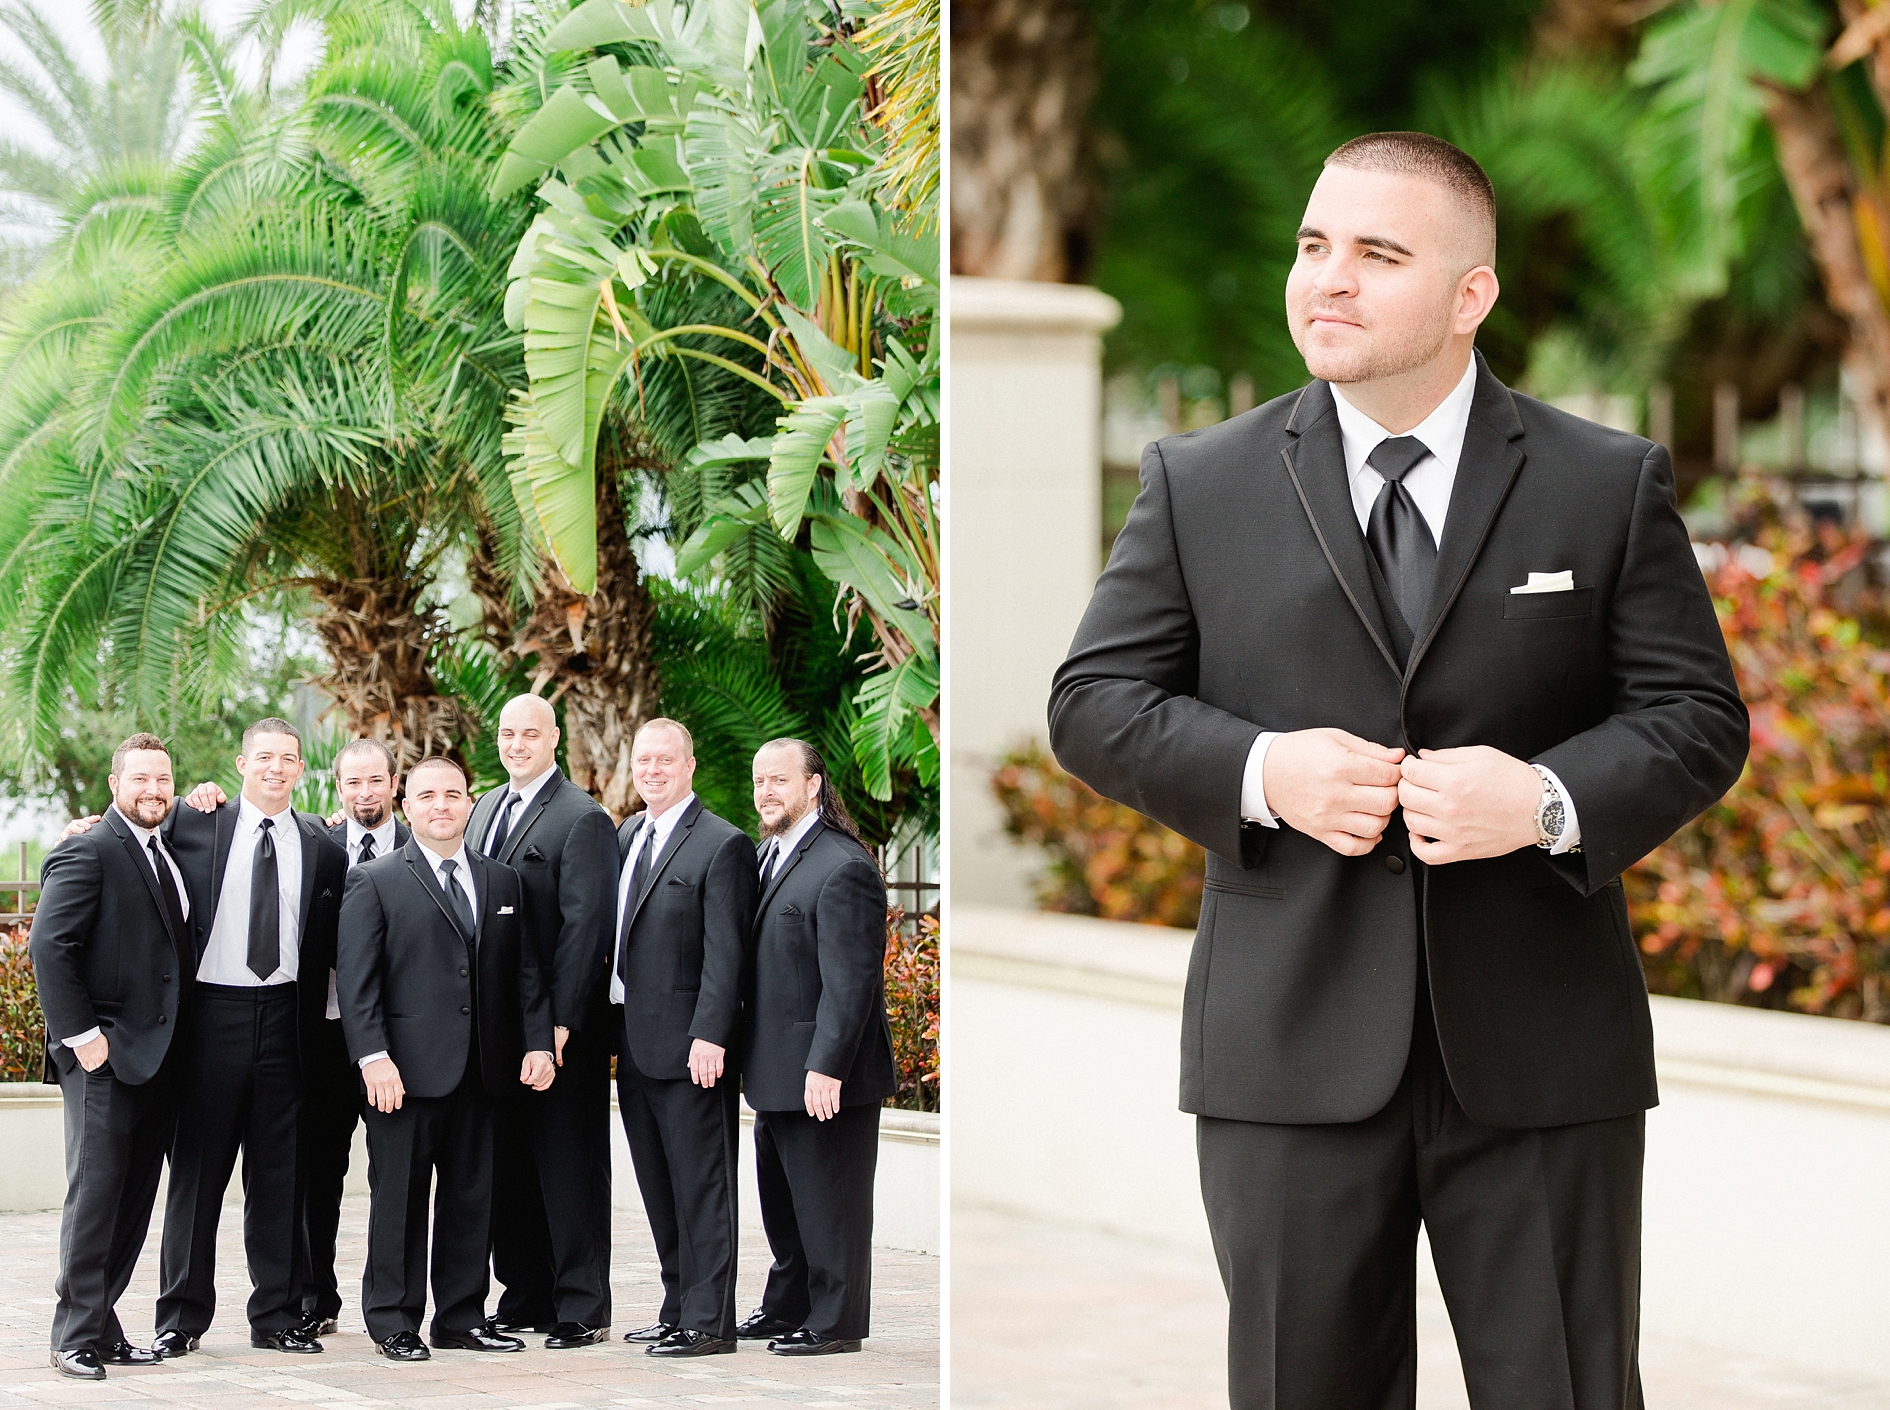 Tampa Wedding Photographer | © Ailyn La Torre Photography 2016